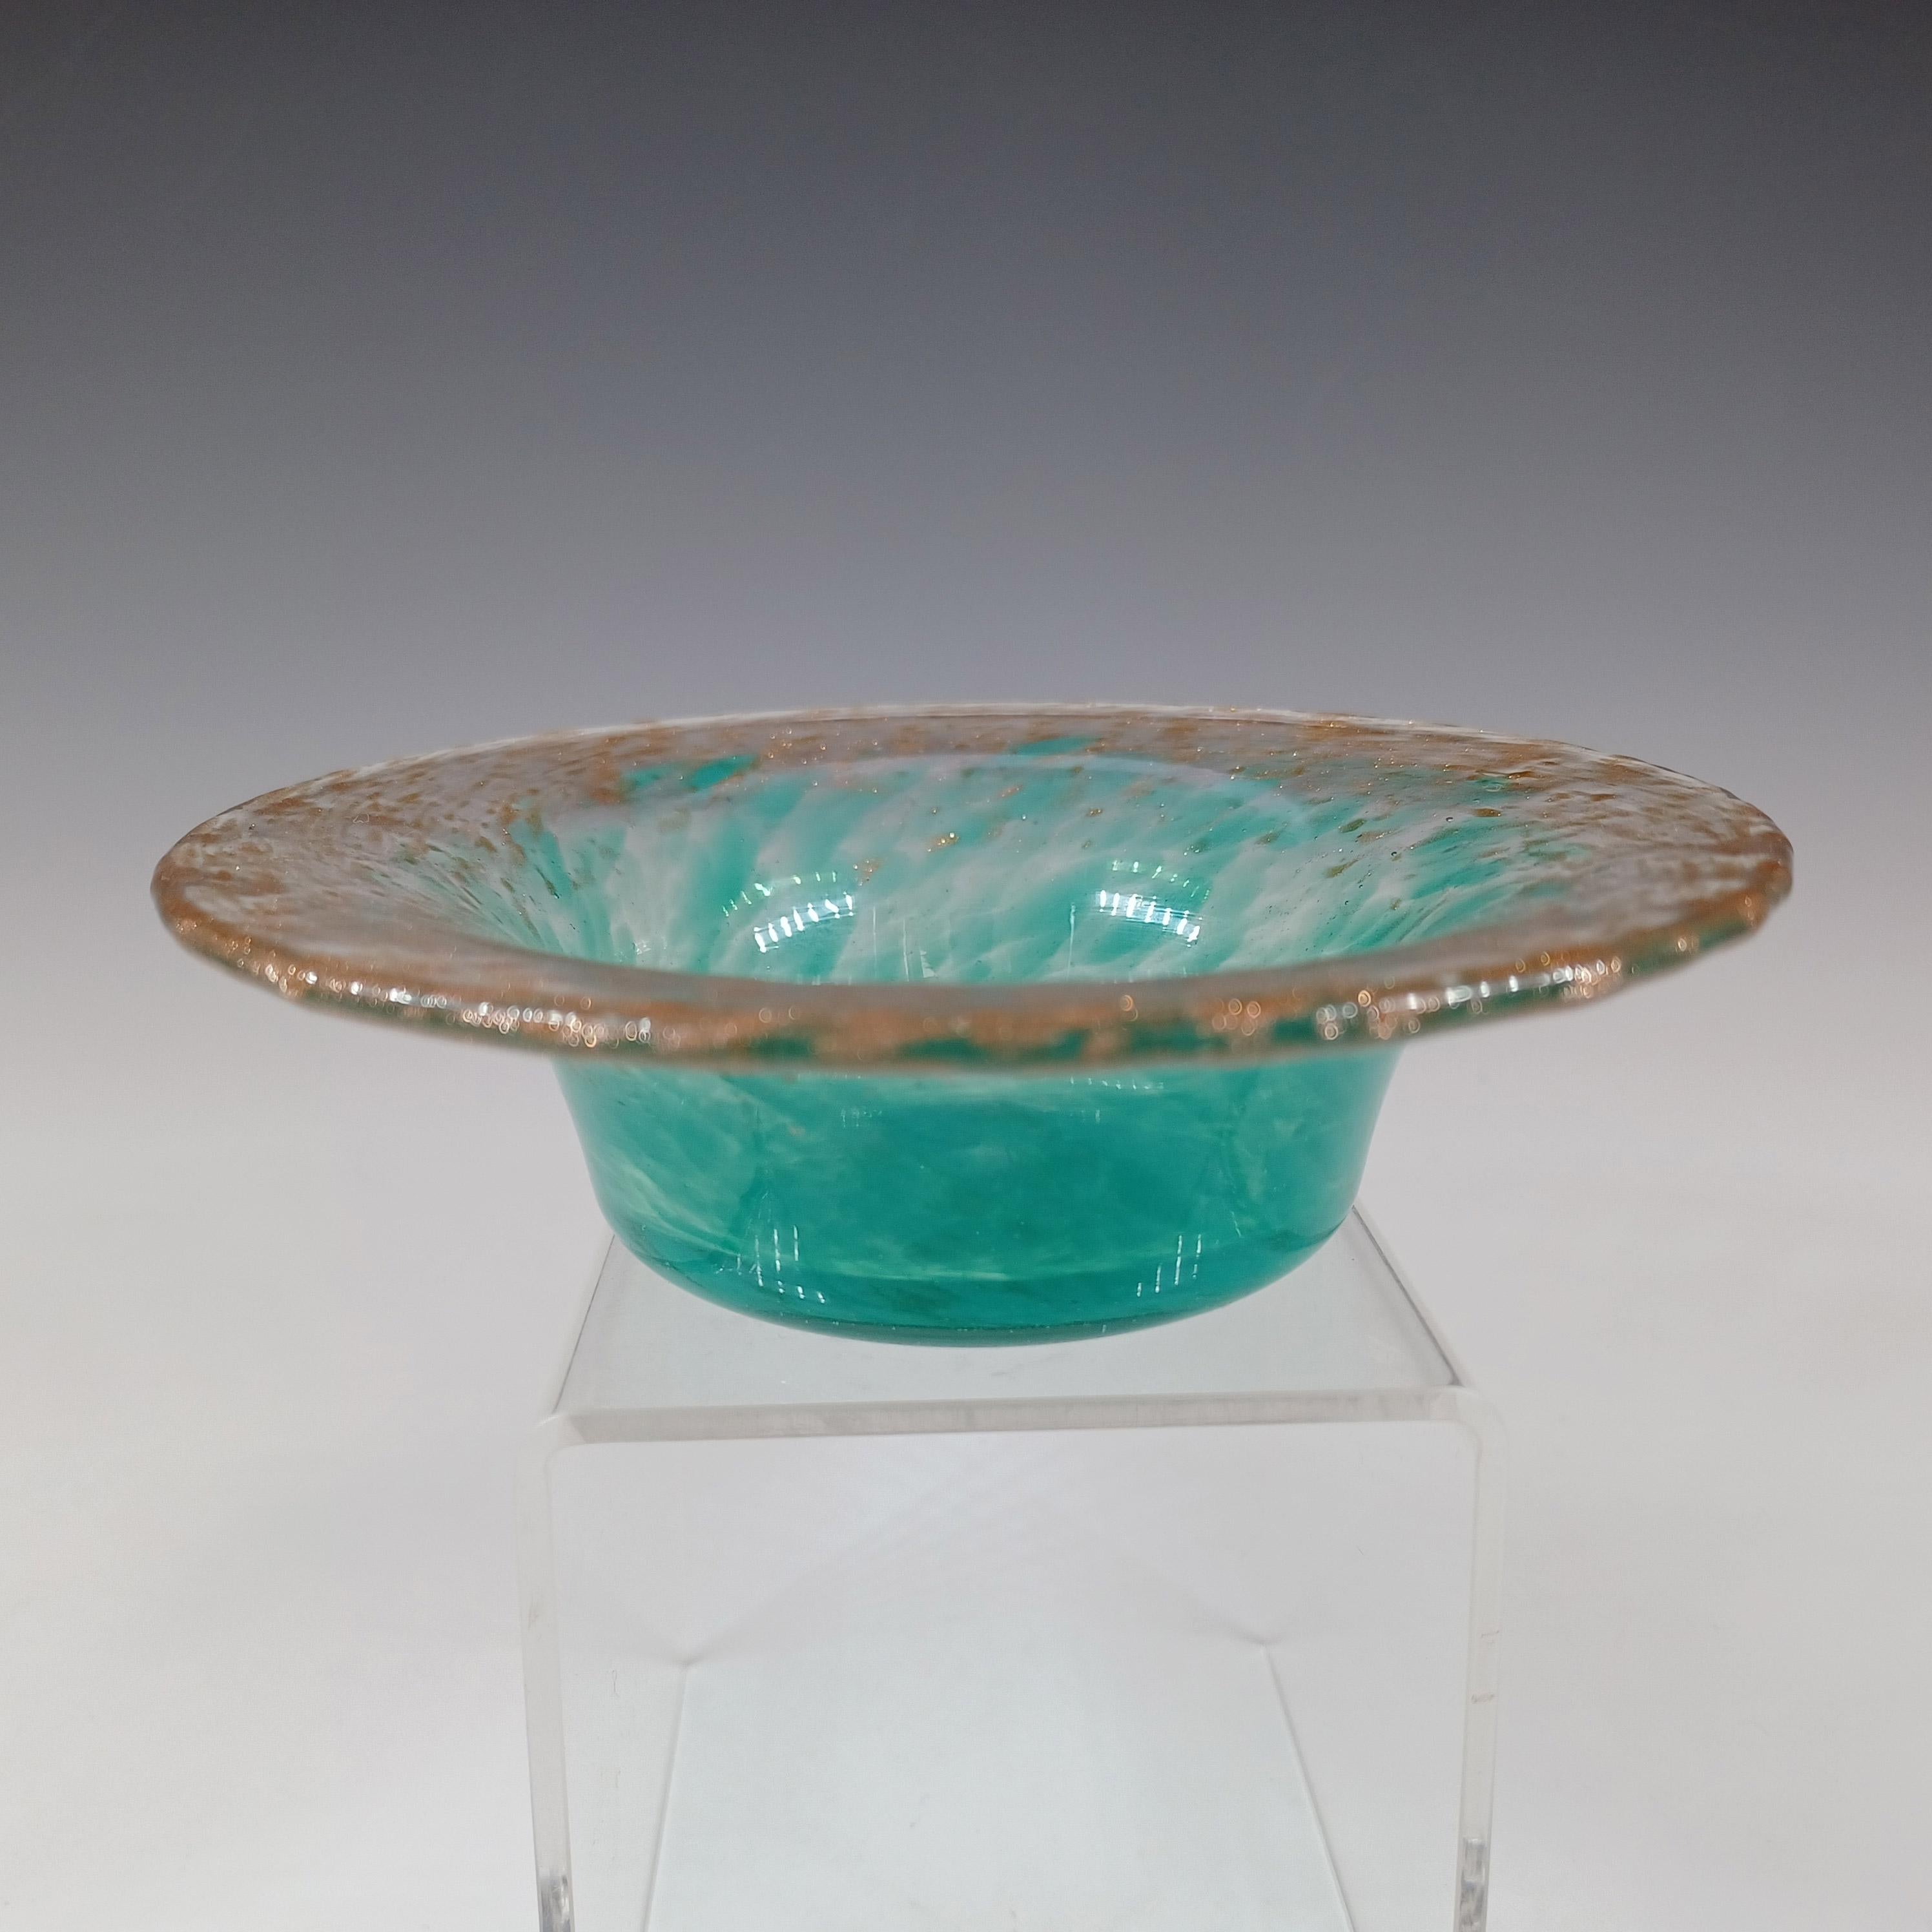 A Monart green & clear mottled glass bowl with speckles of copper aventurine. Made by the Scottish Moncrieff's factory in the 1930's/40's, pattern number UB.XI+. Breaking the pattern number down, UB is the shape number, and XI+ is the size (5 inch